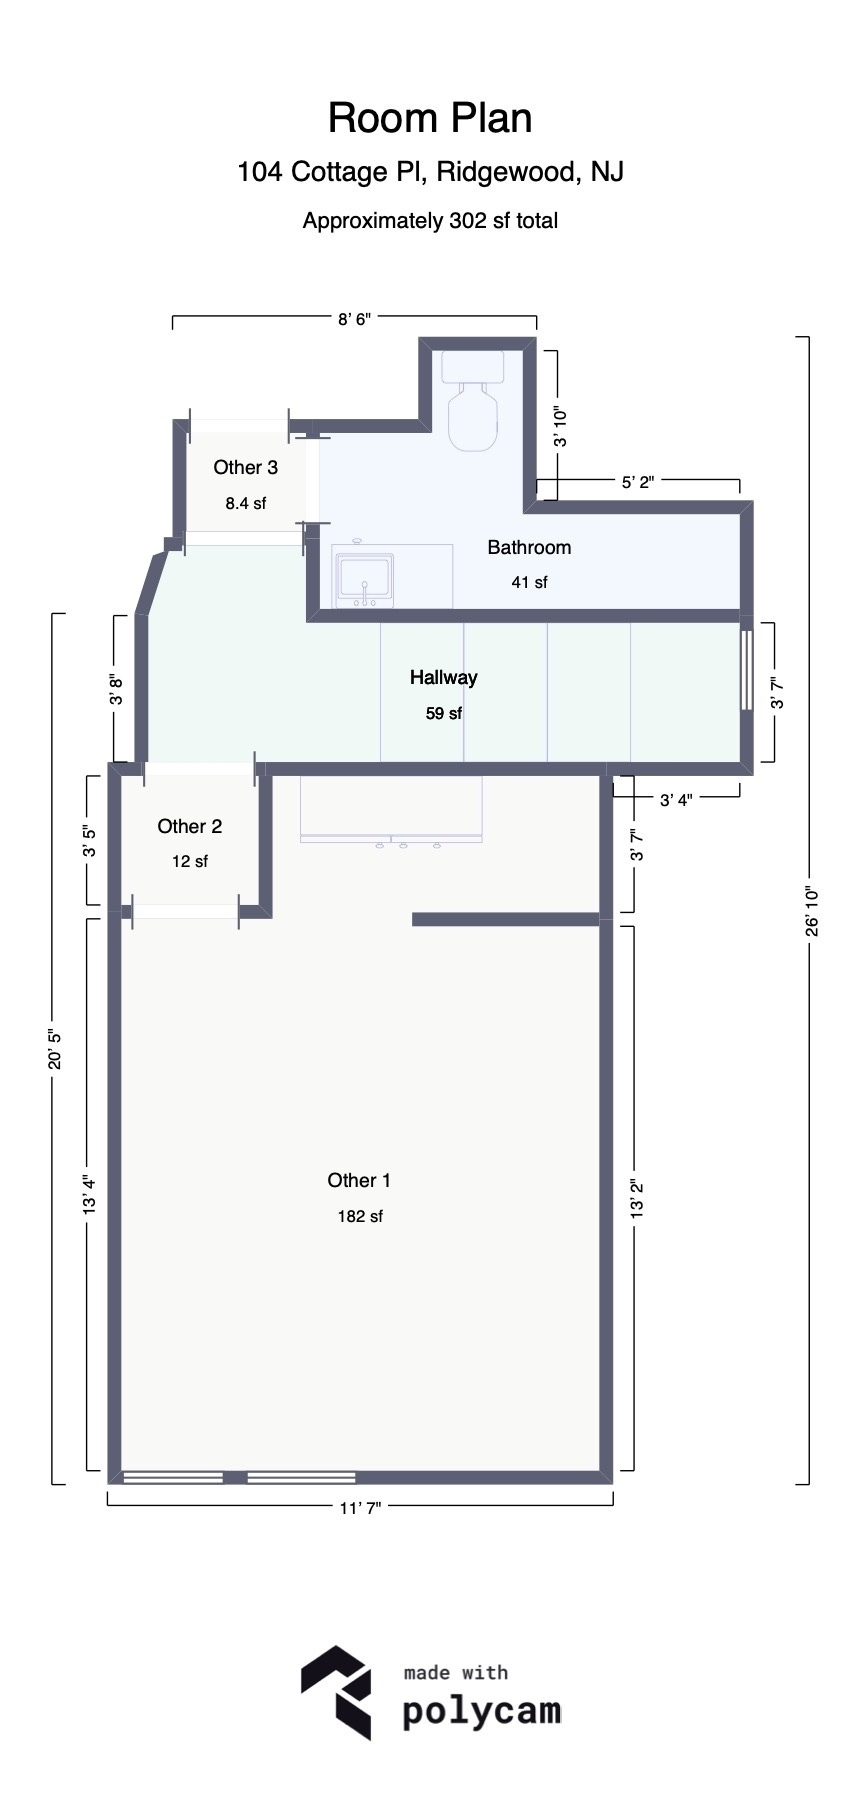 A floor plan of an apartment. The apartment has three rooms, a bathroom, and a hallway. The total area of the apartment is approximately 302 square feet.